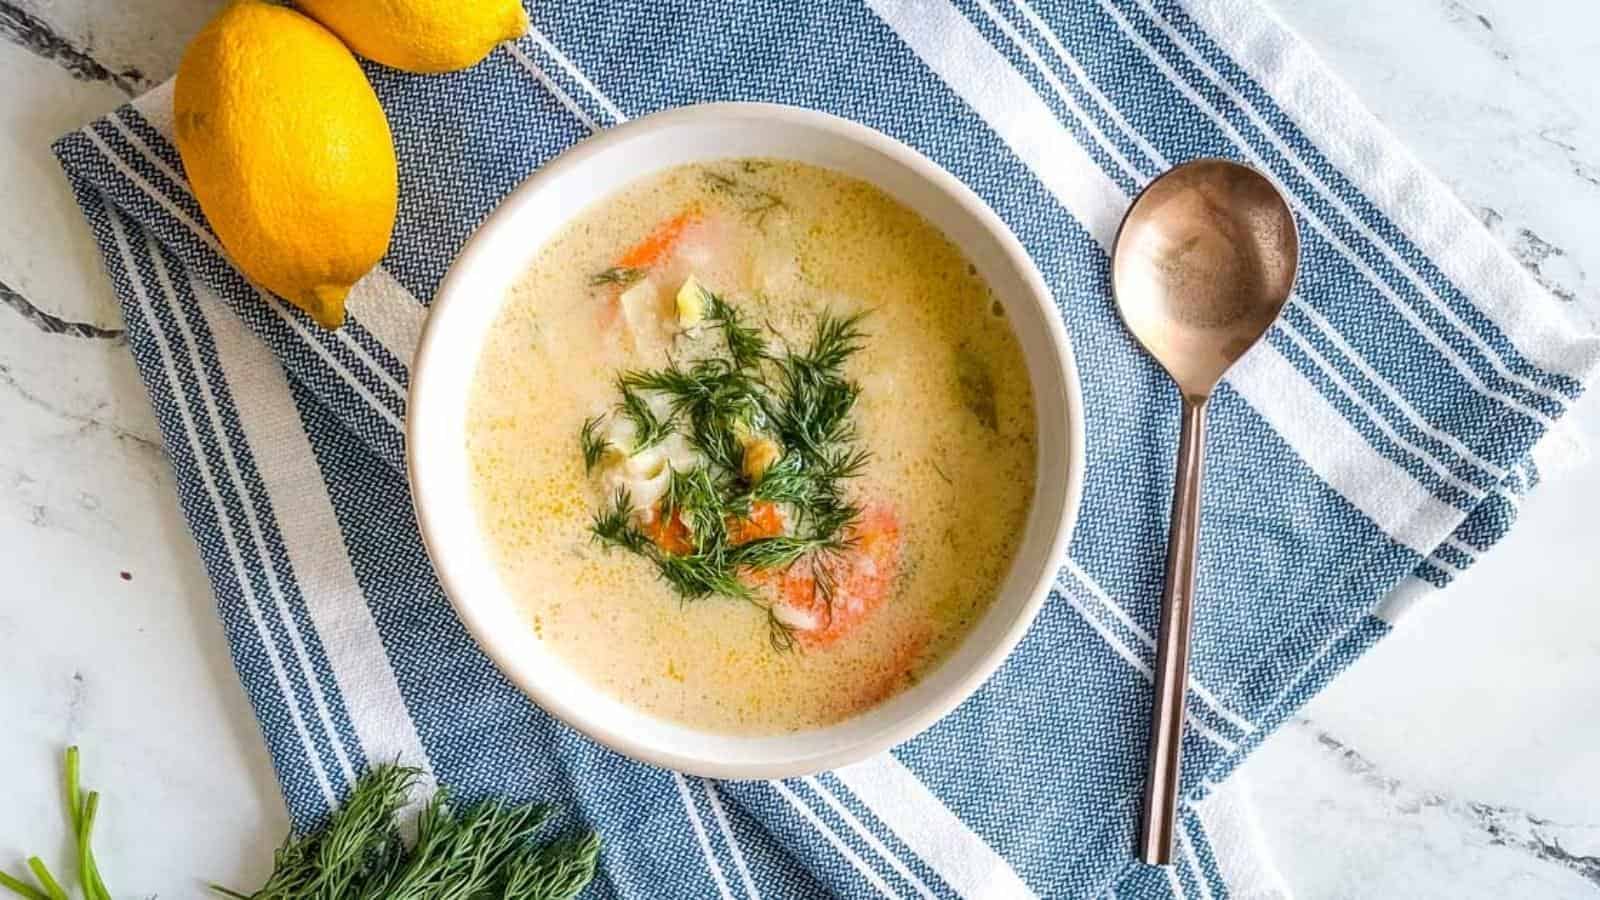 A bowl of soup with lemons and dill.